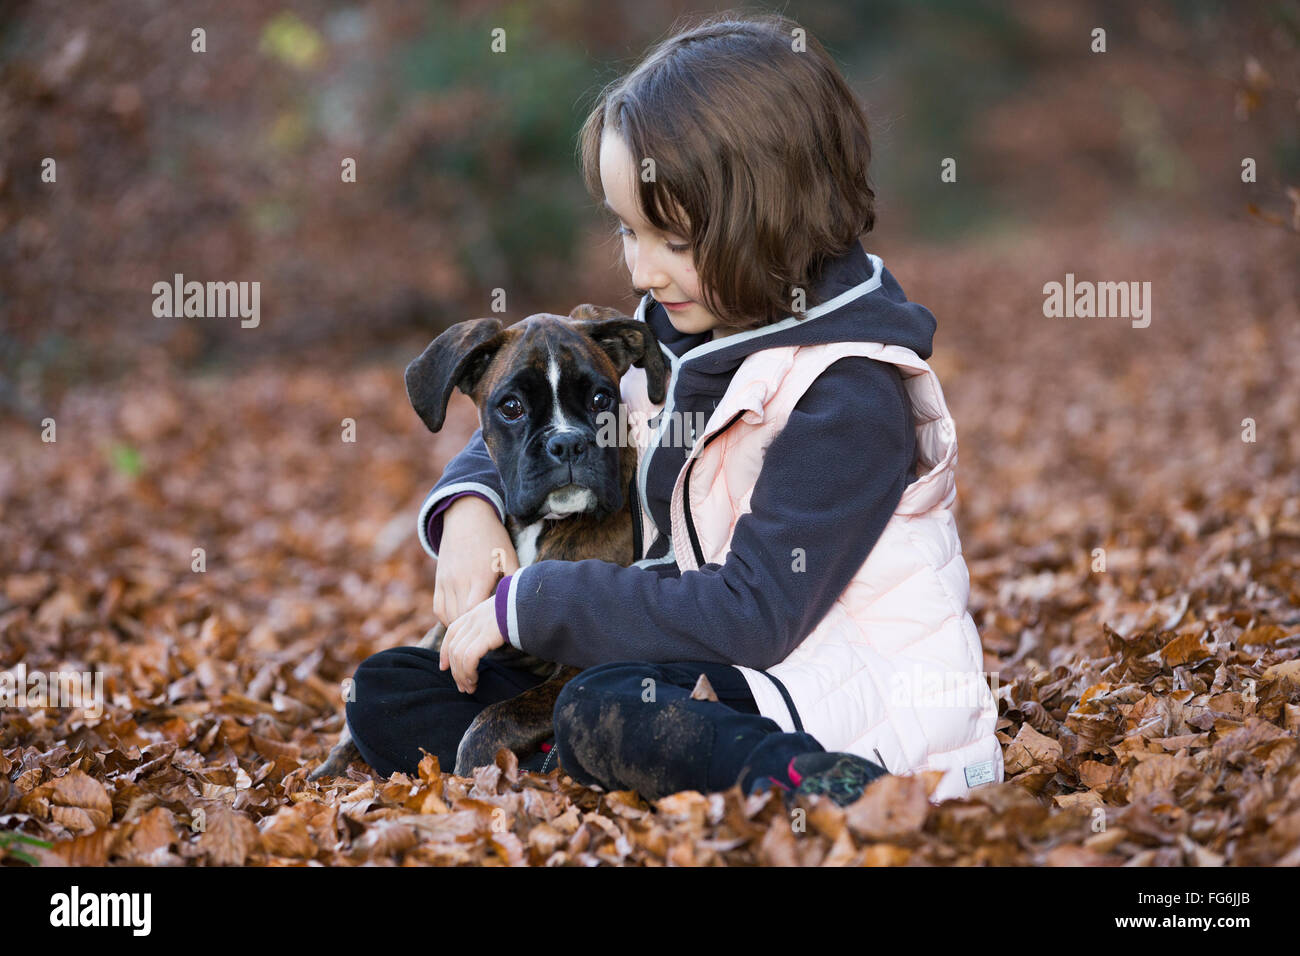 Boxer puppy sitting with little girl in autumn leaves Stock Photo